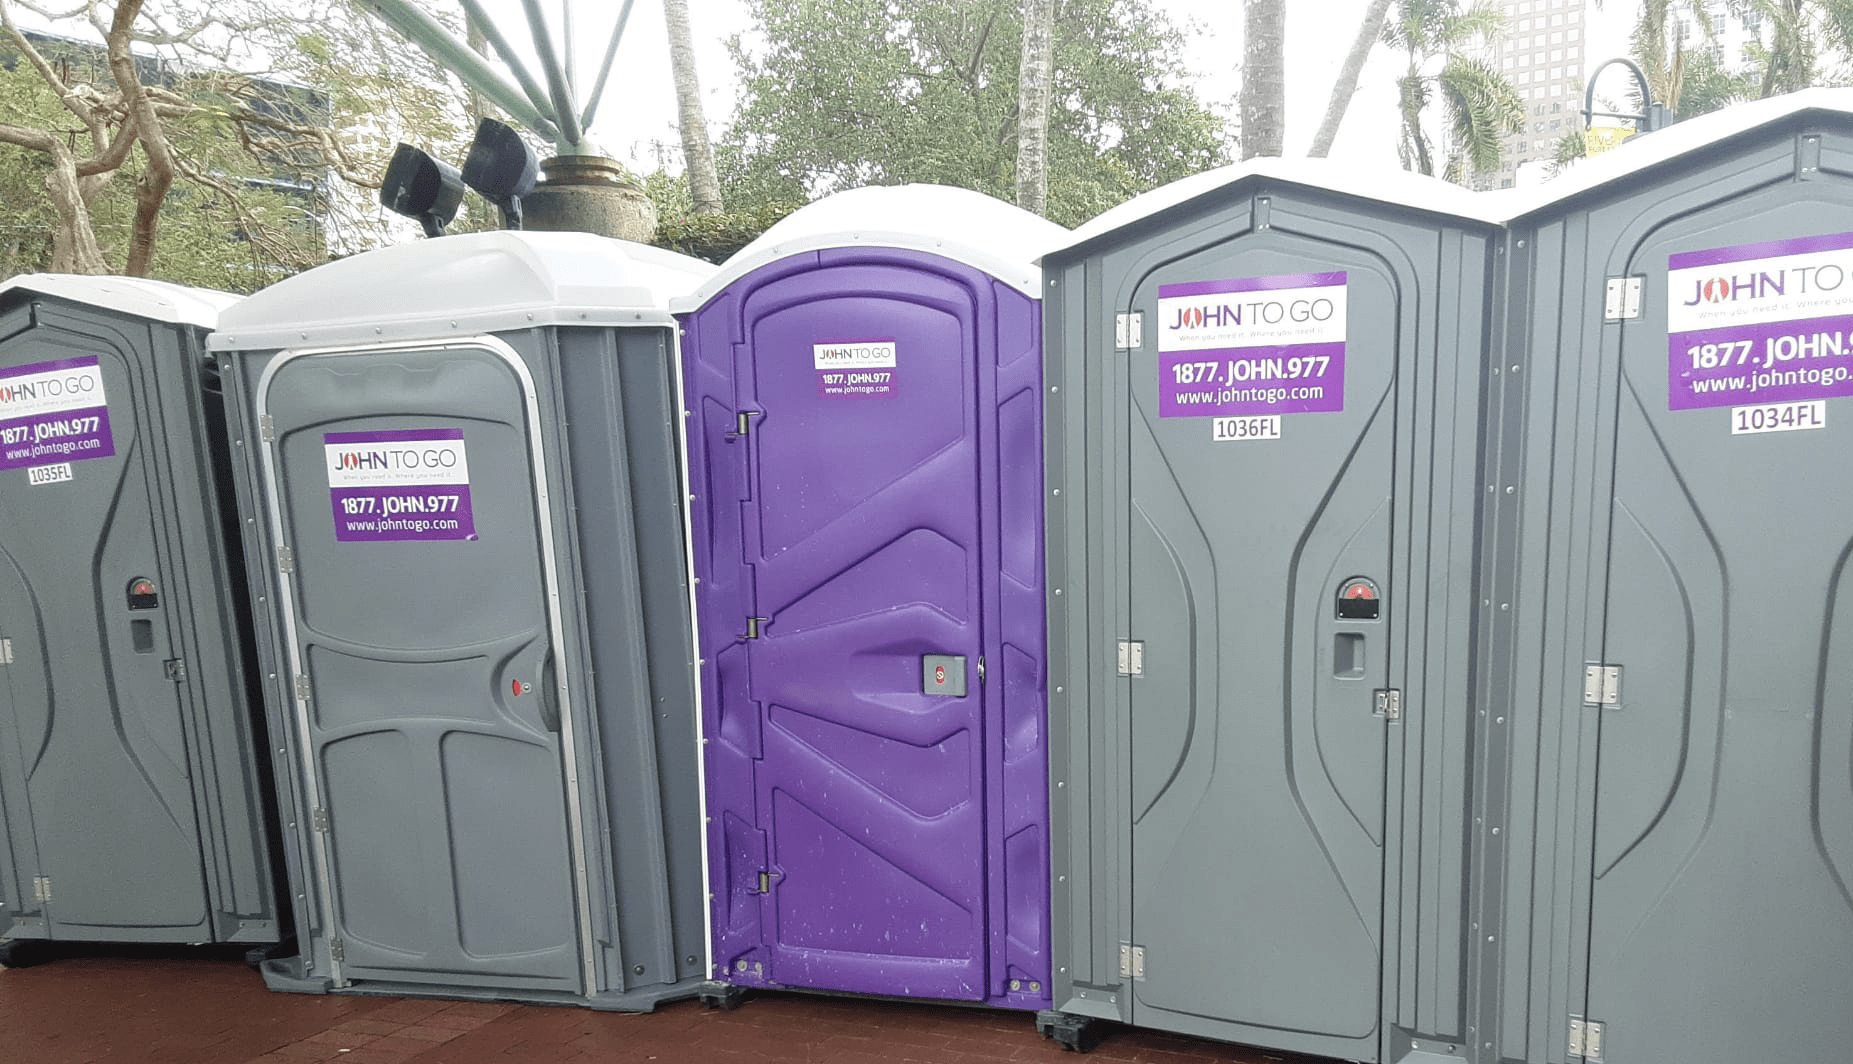 Renting farm restrooms for farm functions